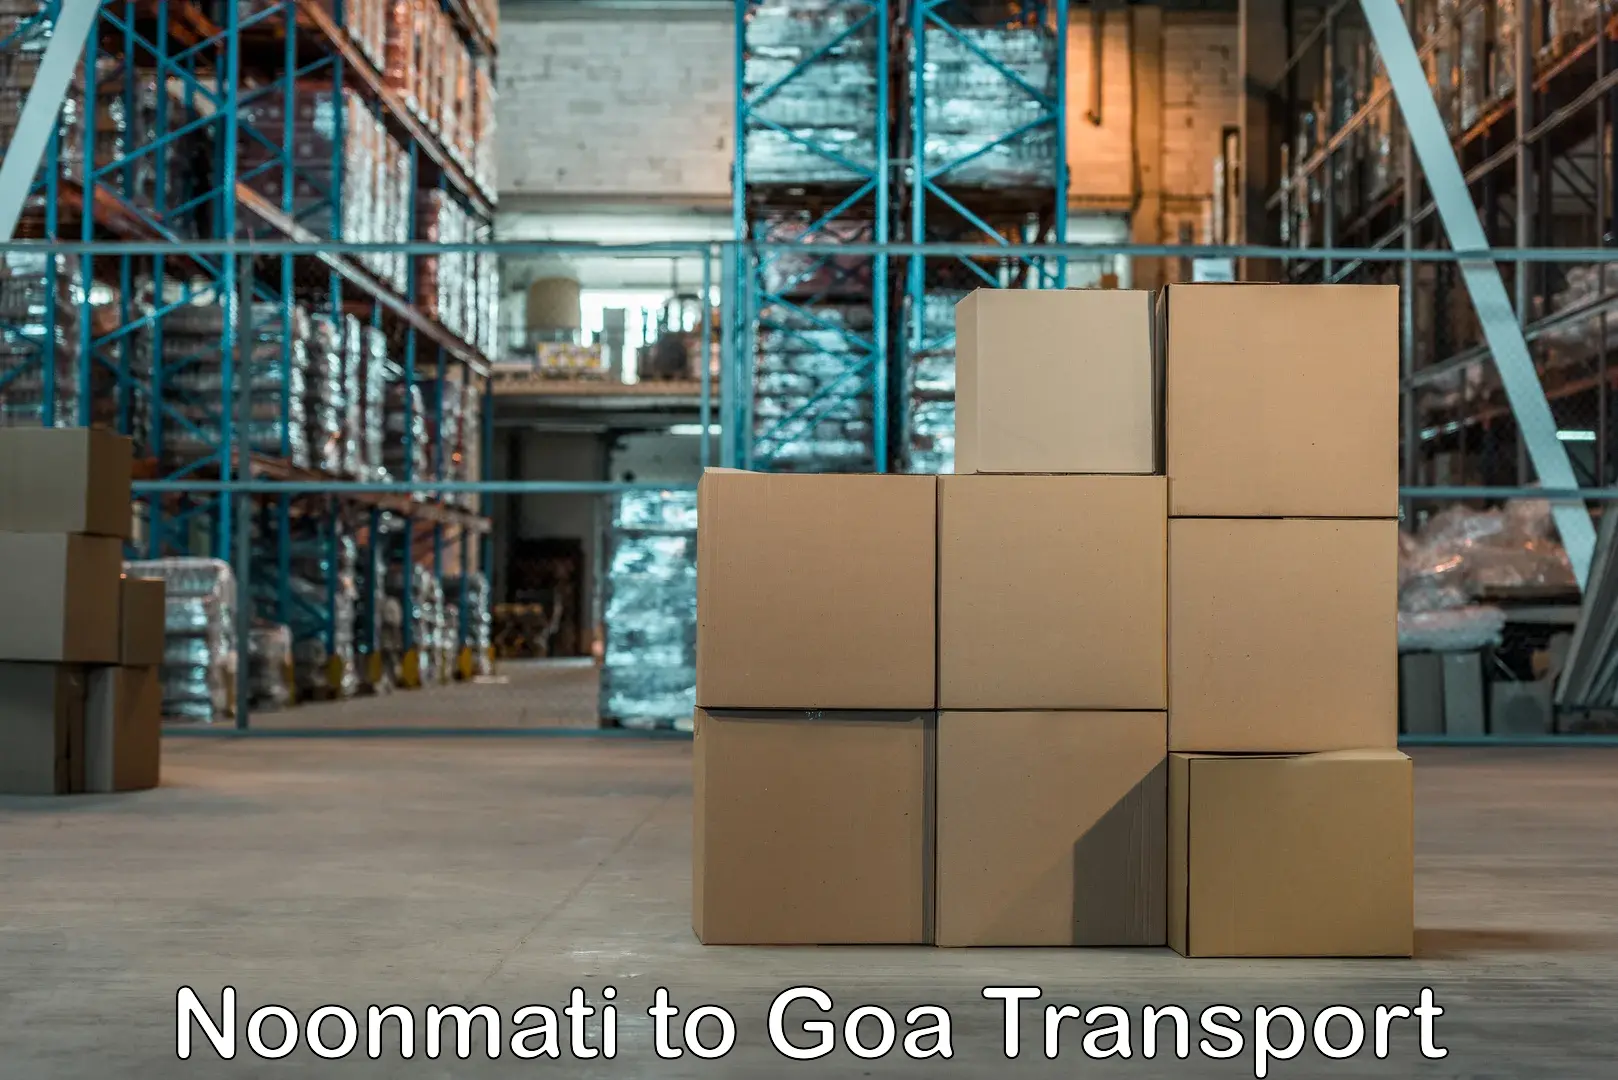 Online transport booking Noonmati to Goa